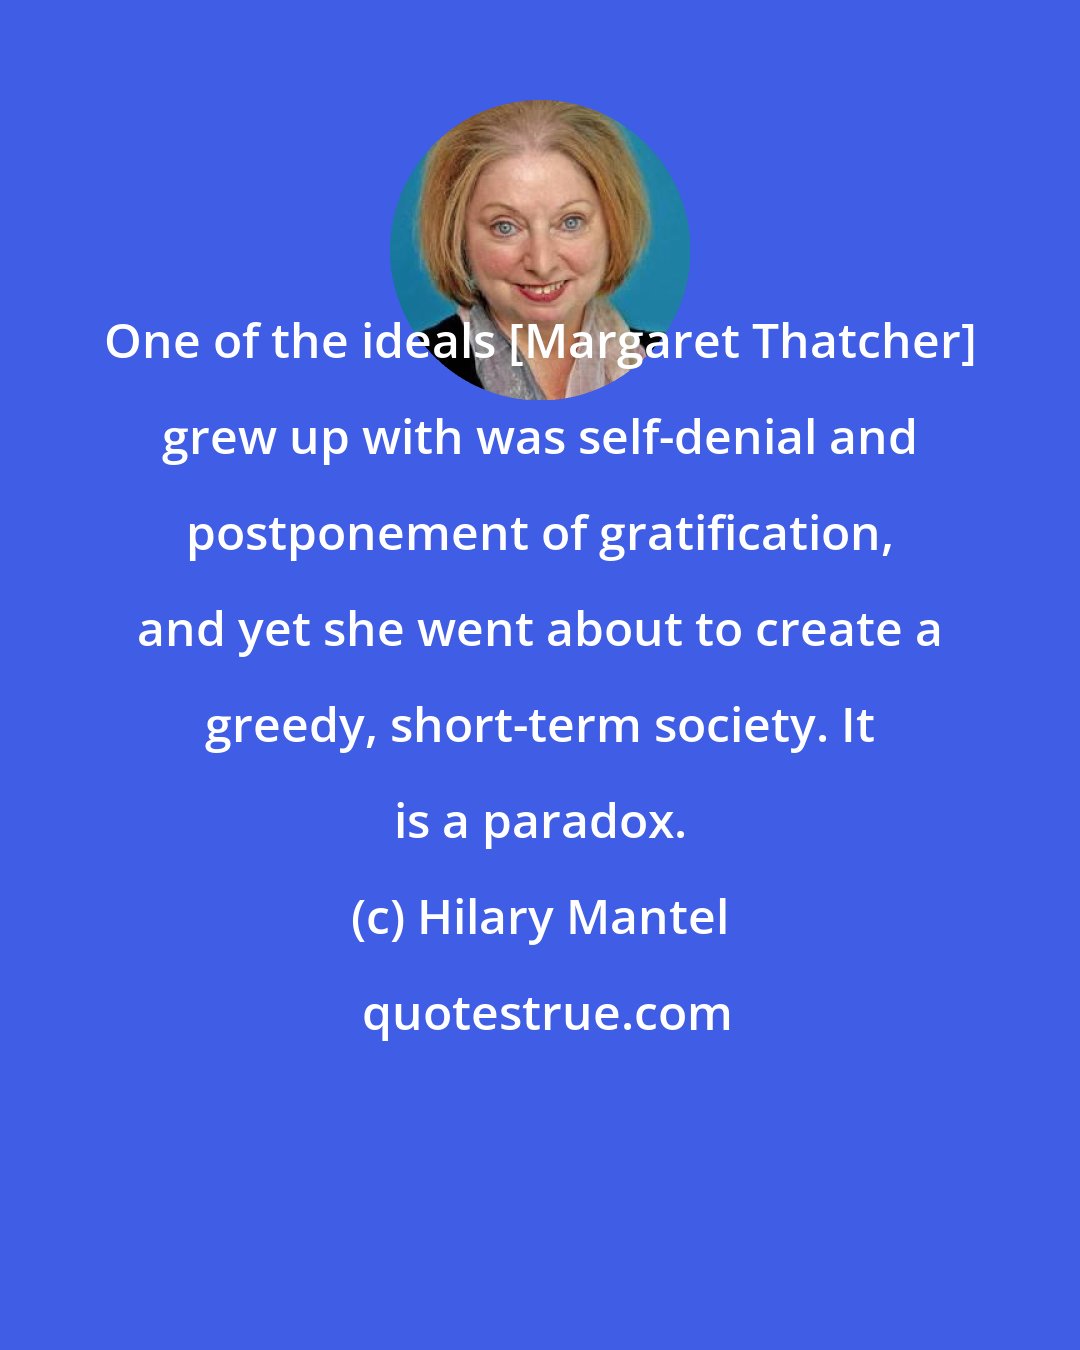 Hilary Mantel: One of the ideals [Margaret Thatcher] grew up with was self-denial and postponement of gratification, and yet she went about to create a greedy, short-term society. It is a paradox.